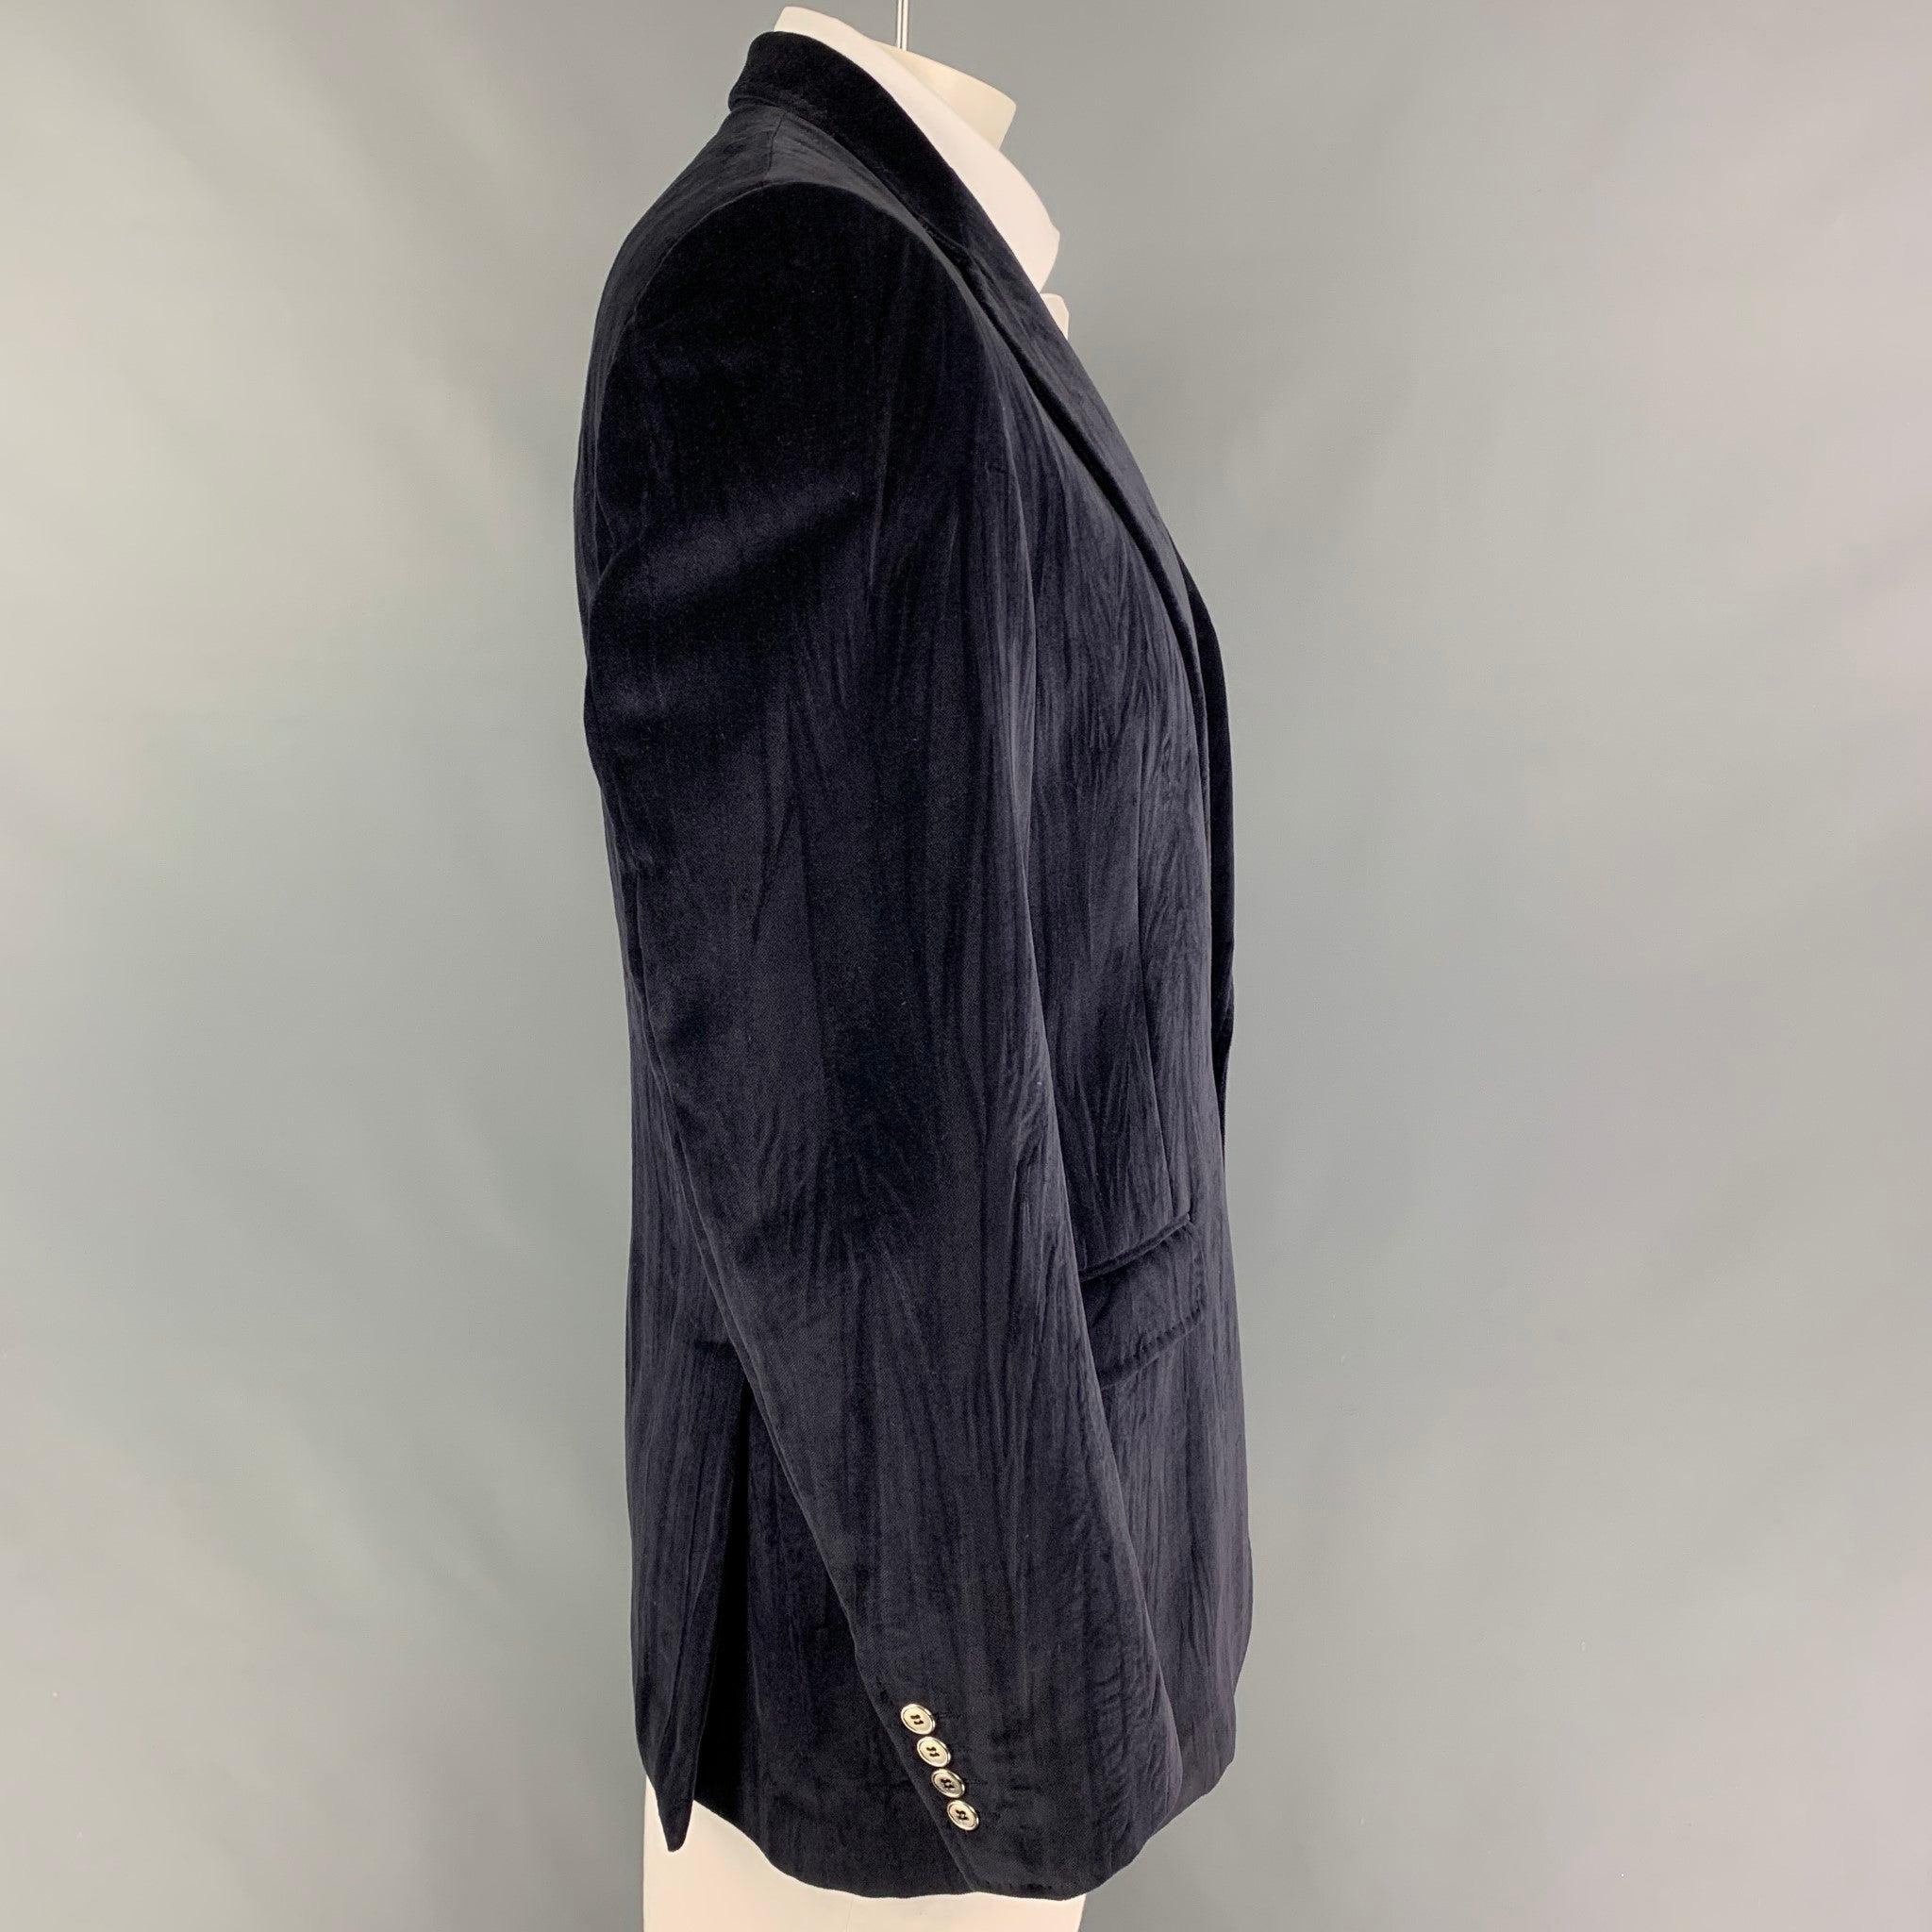 DOLCE & GABBANA sport coat comes in a dark purple cotton witch a full liner featuring a notch lapel, flap pockets, double back vent, and a single button closure. Made in Italy.
Very Good
Pre-Owned Condition. 

Marked:   52 

Measurements: 
